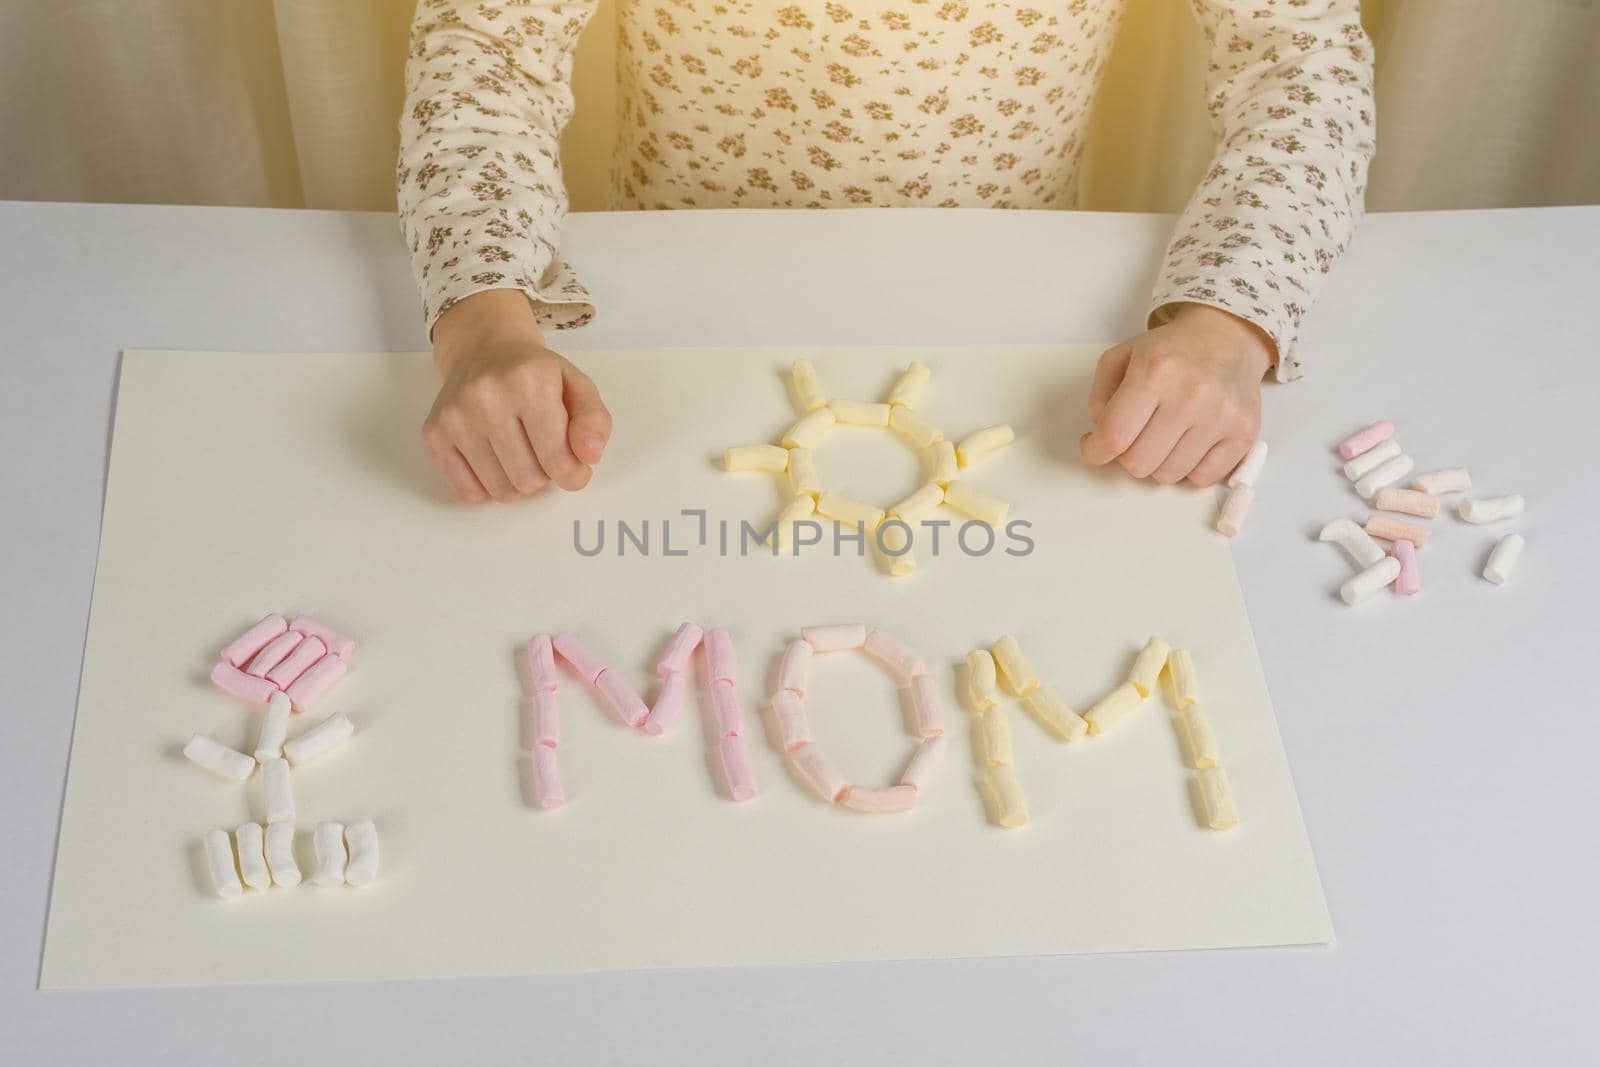 Mothers Day. A gift to the child mom, drawing an applique from marshmallow by VH-studio